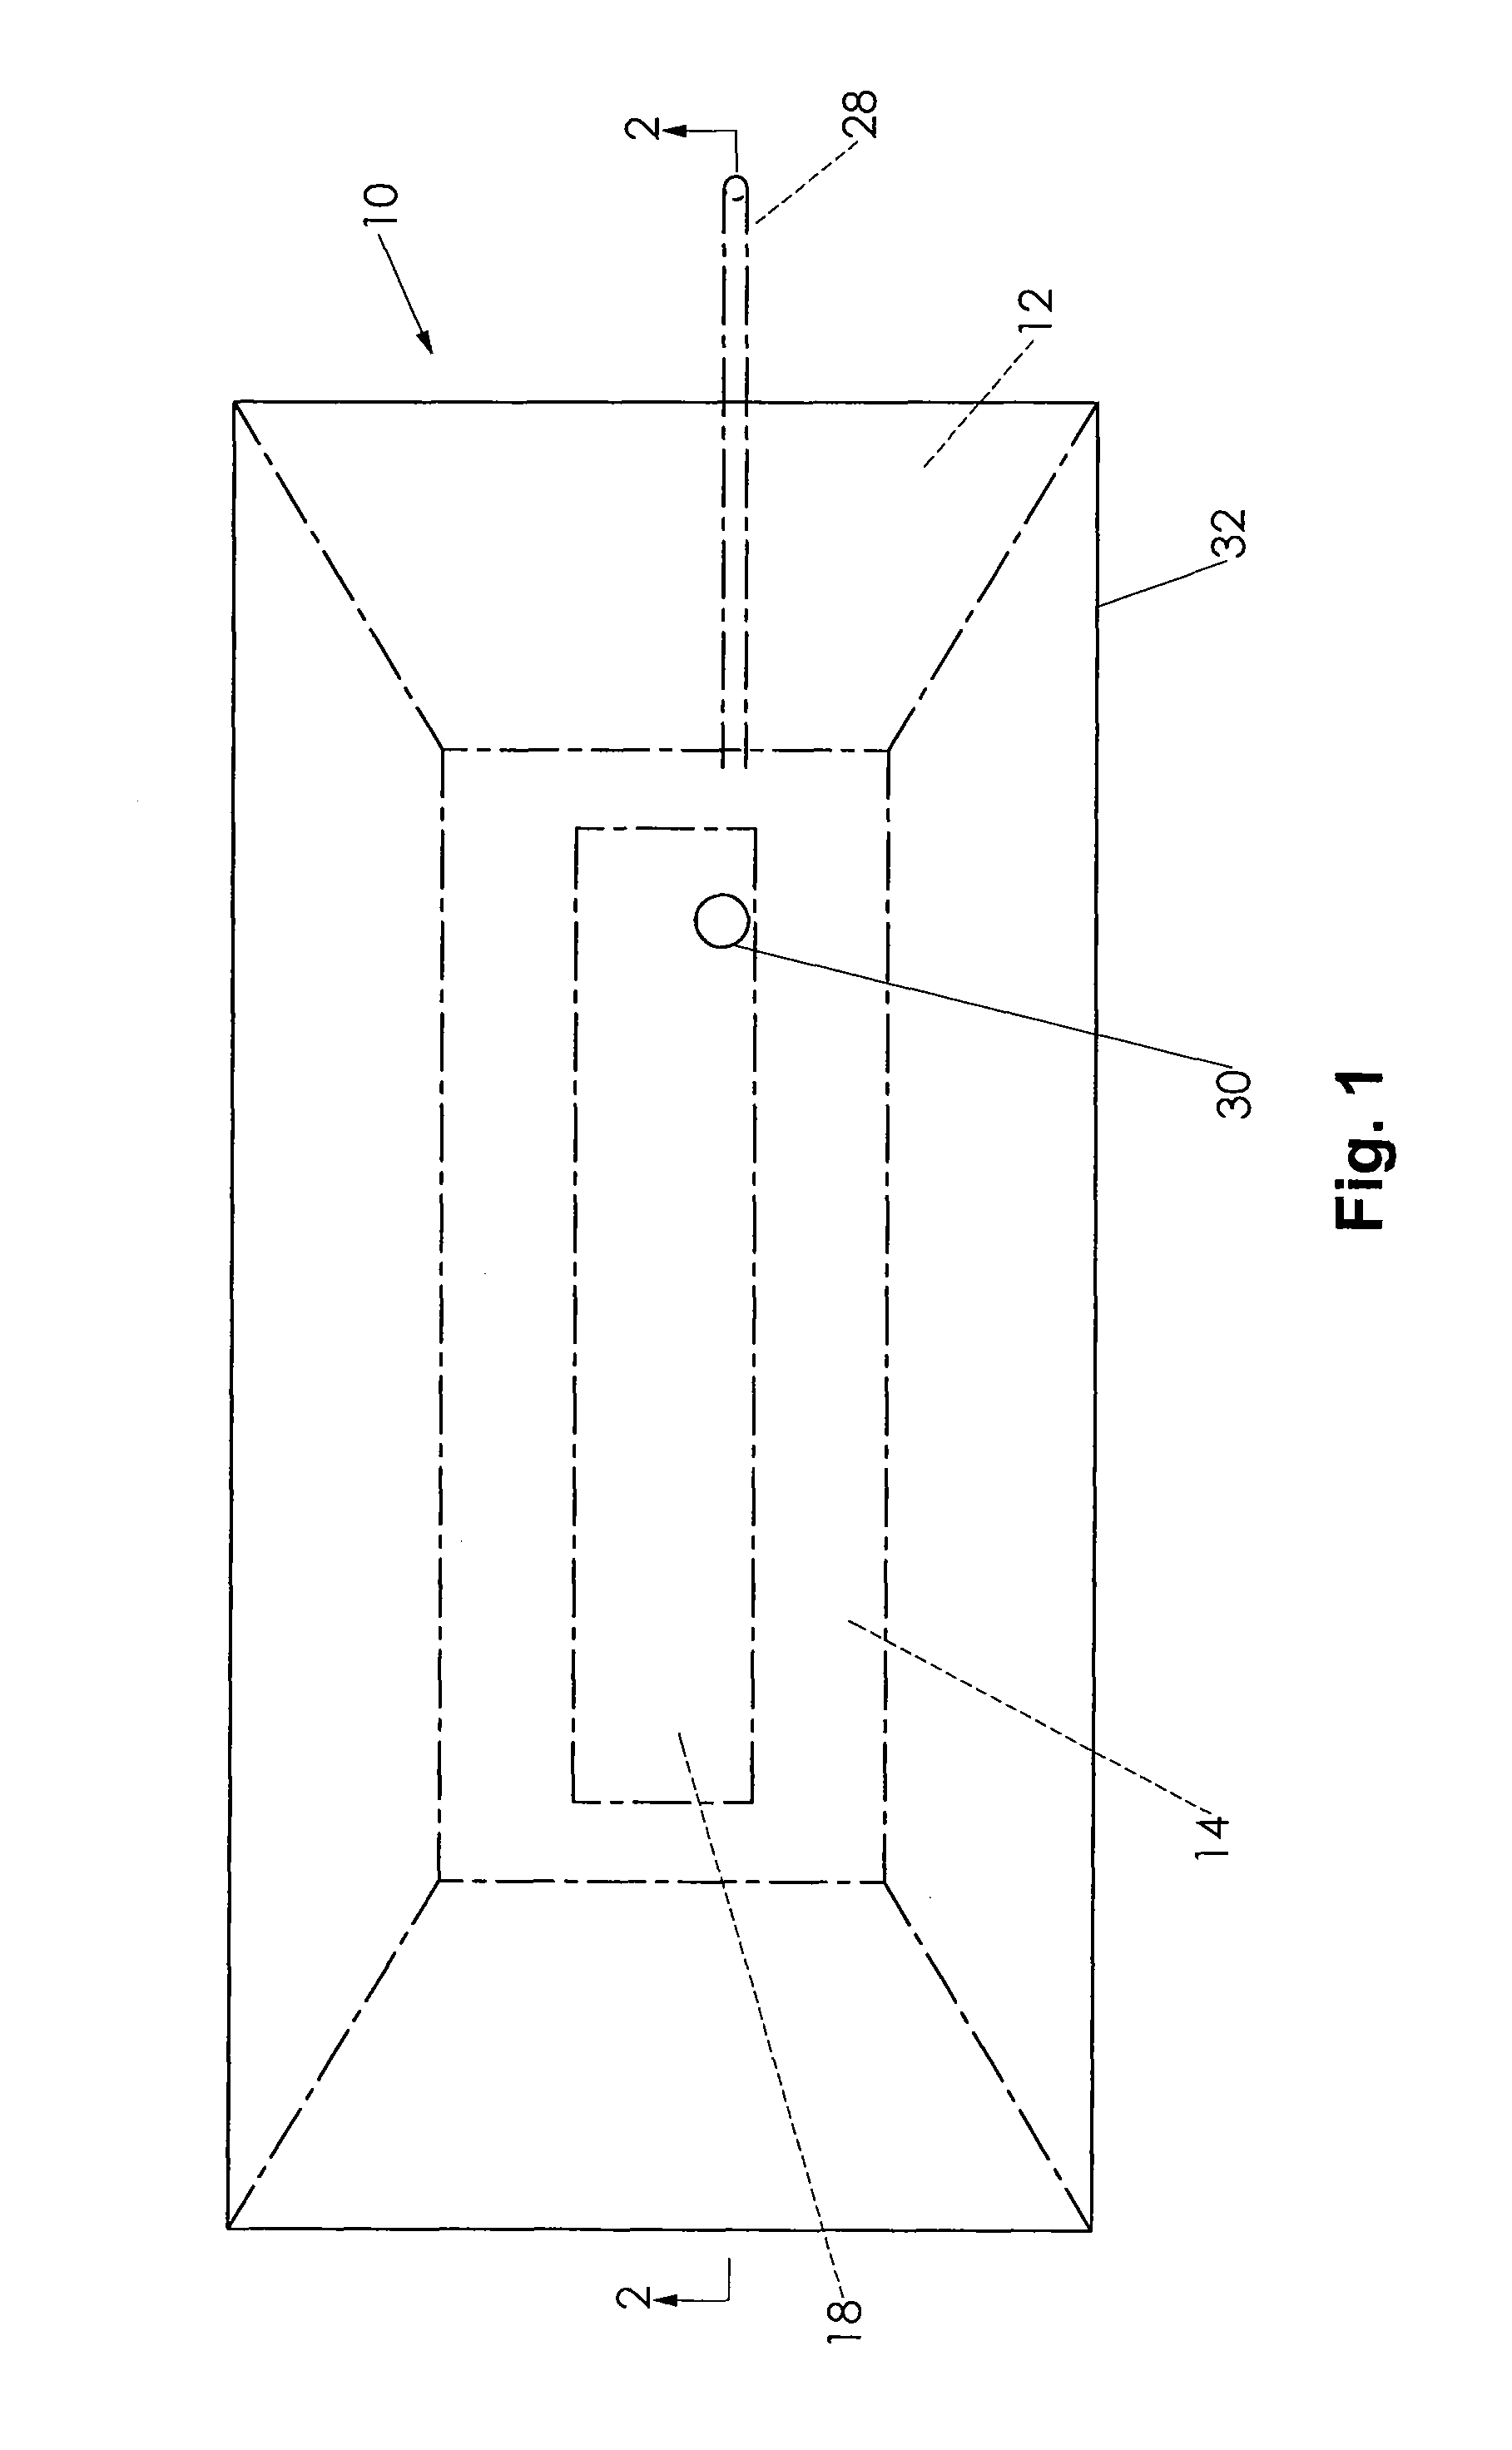 Water drainage and harvesting system for an artificial turf environment